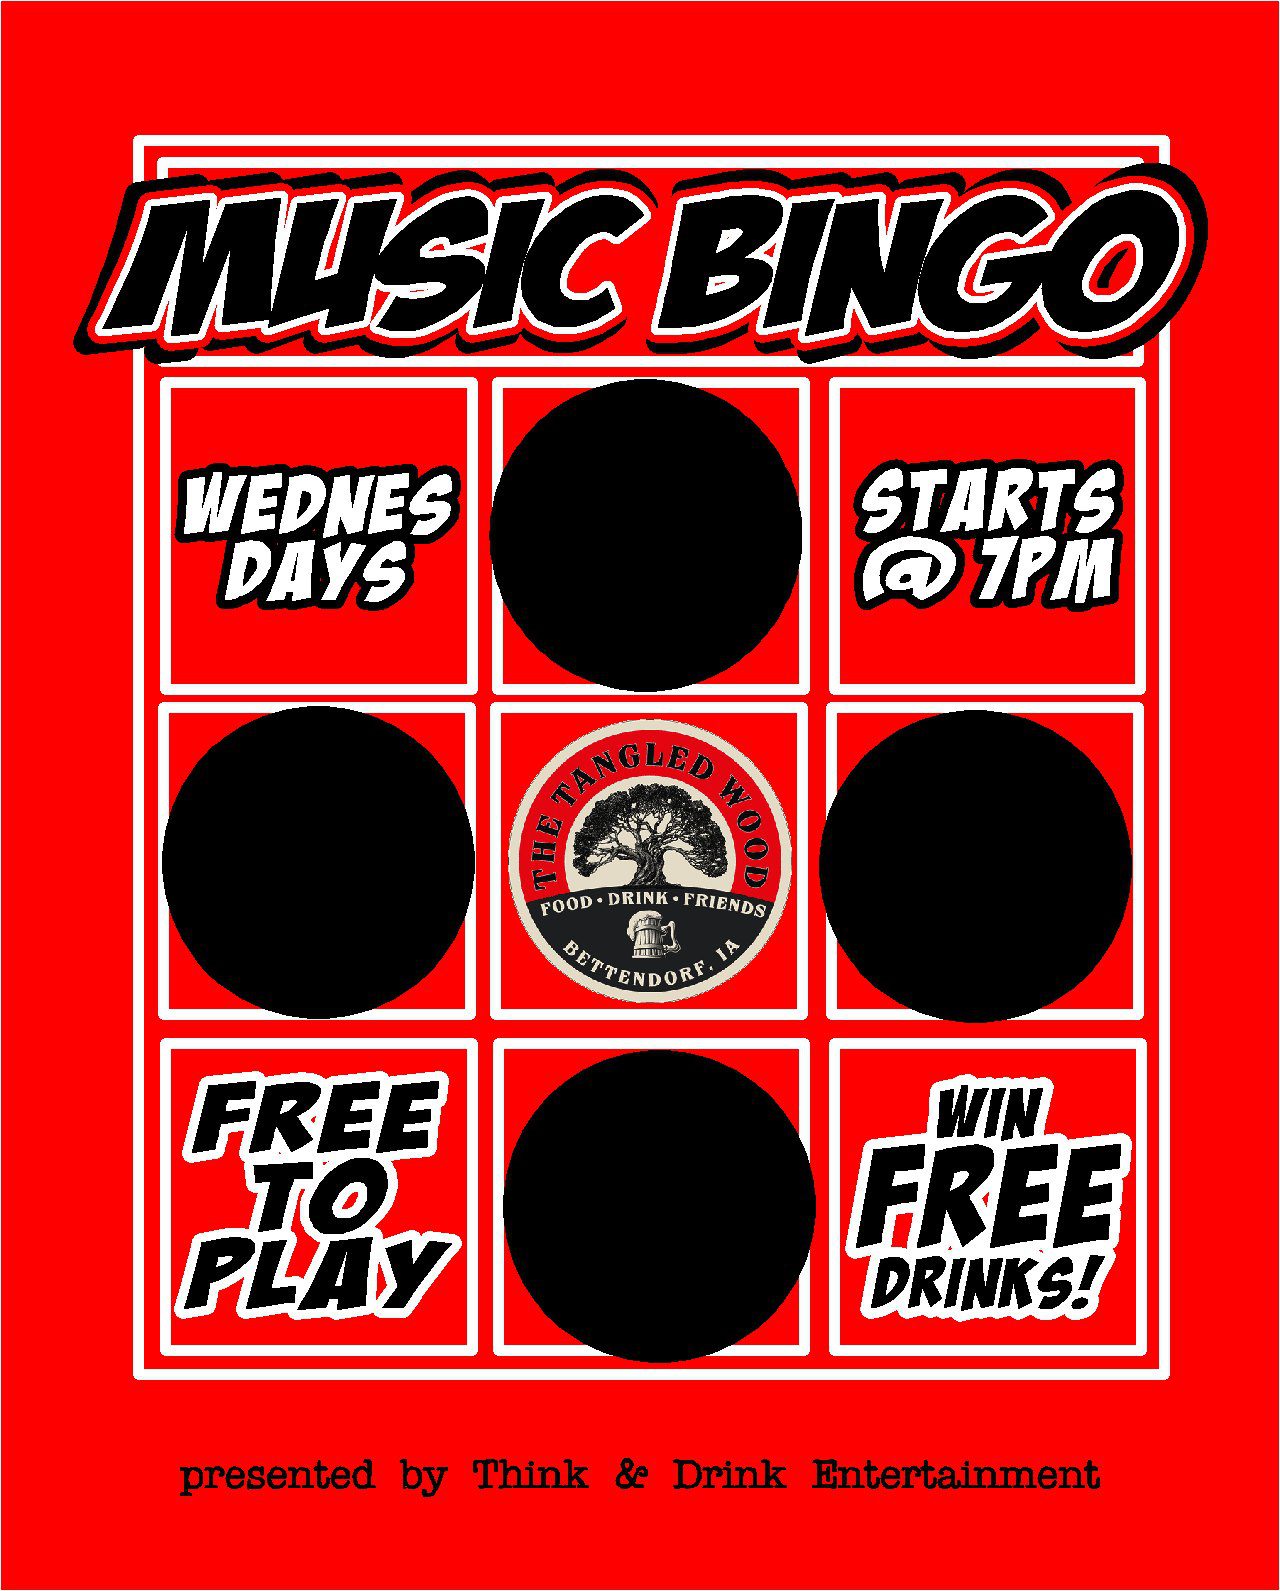 Rock Out With Your Bingo Card Out TONIGHT At Rock Star Bingo In Bettendorf